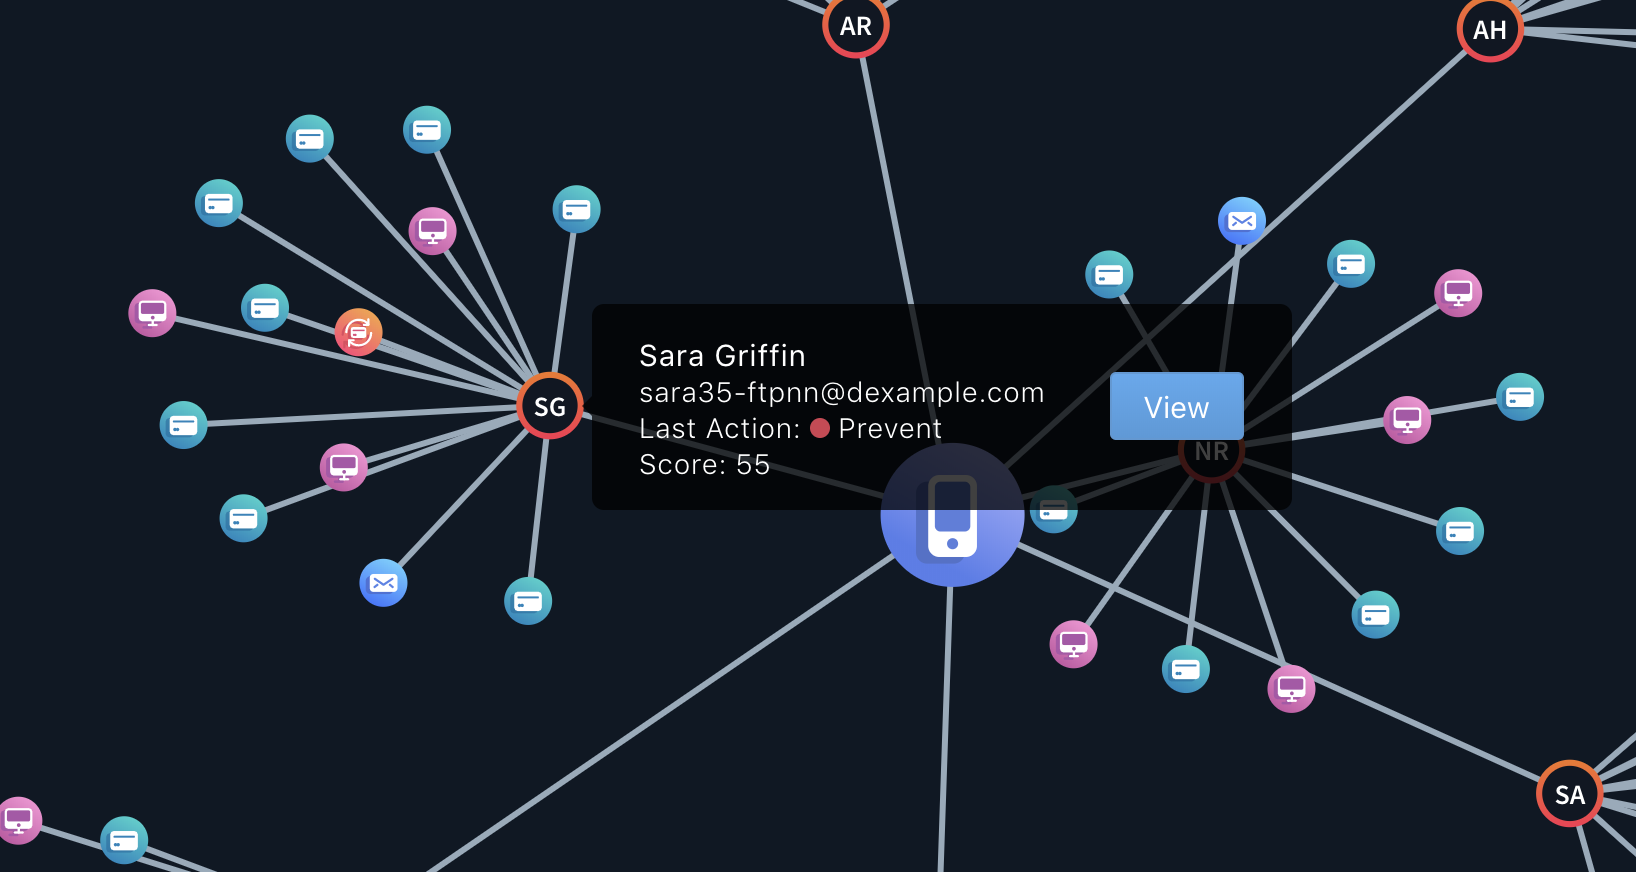 Connect graph database - ATO attack